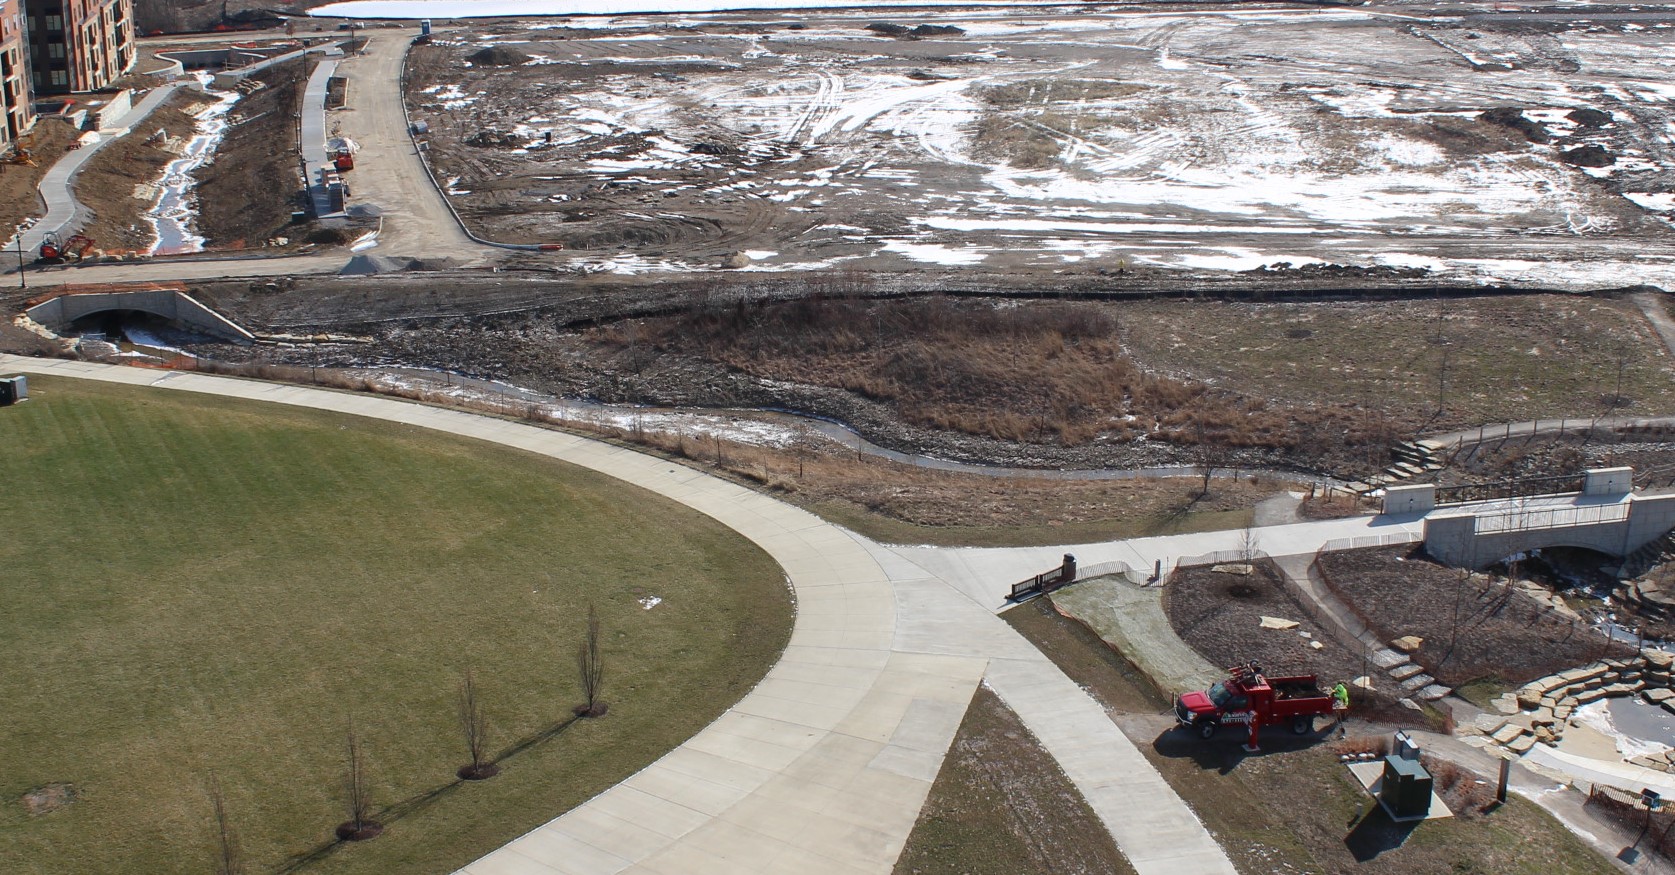 The grant funding will be used to restore the creek area in the center of the picture 